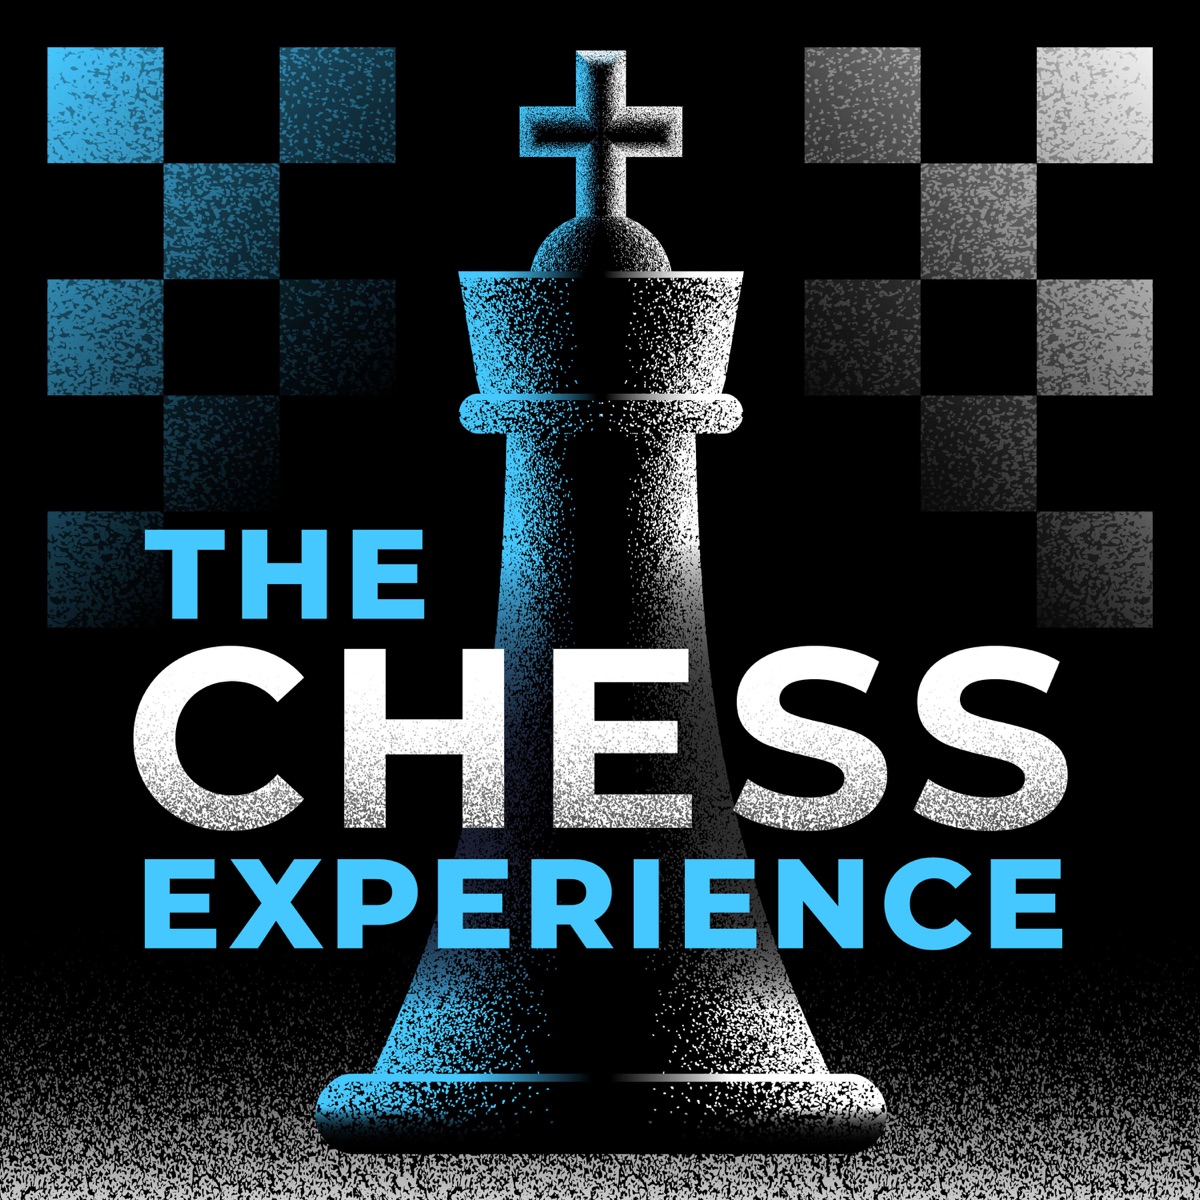 Experts vs. the Sicilian - New York, Chess Programs and Equipment